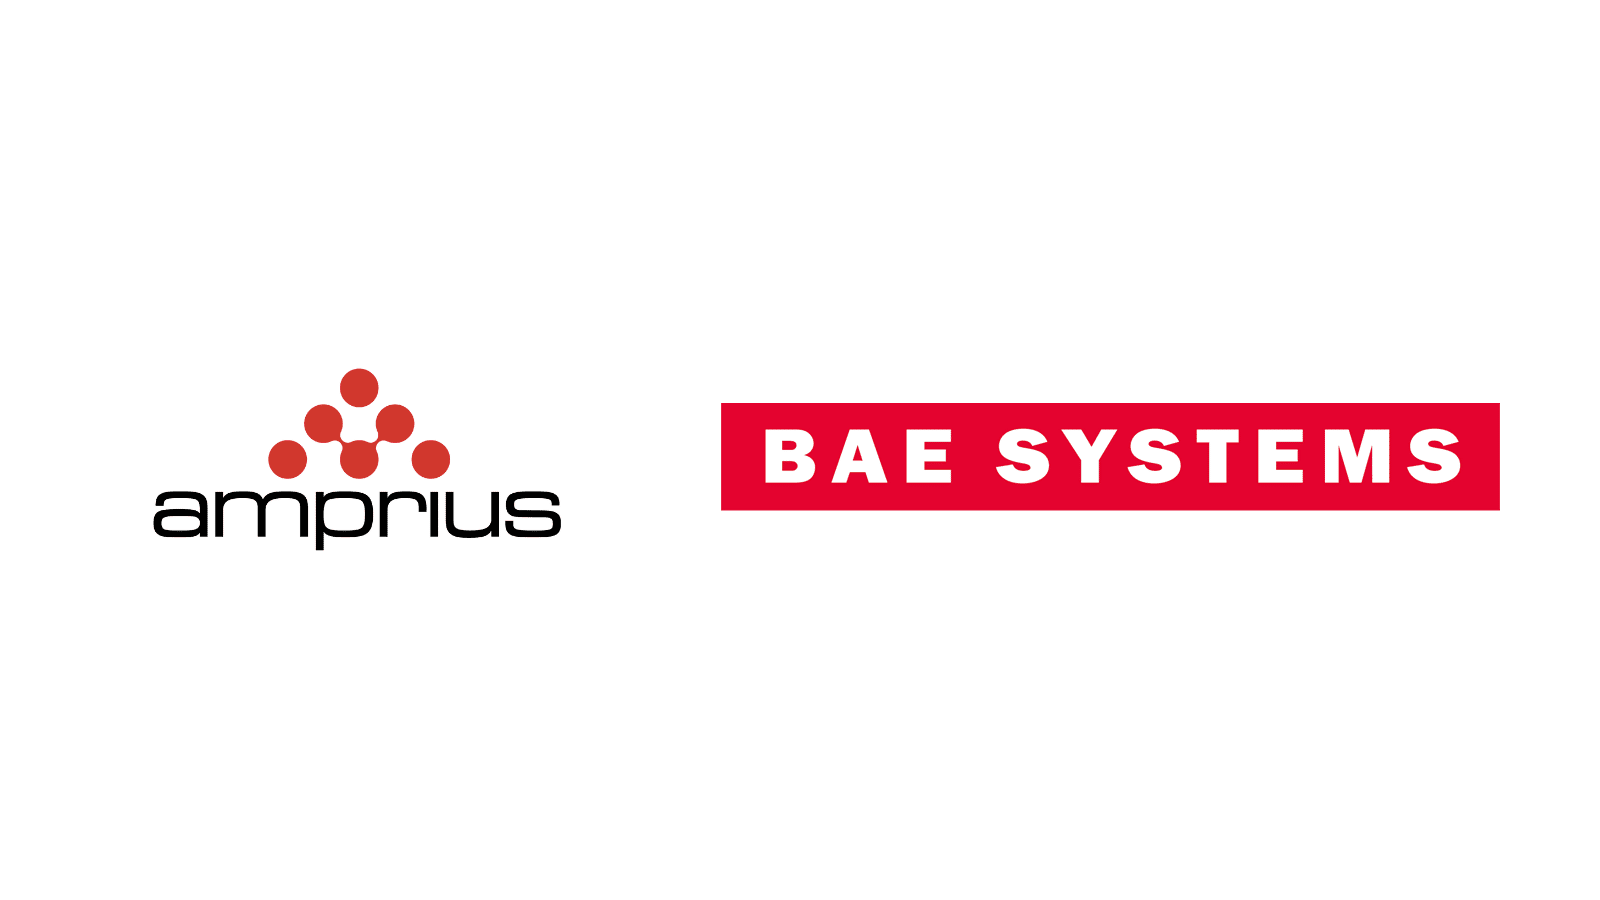 BAE Systems and Amprius Technologies